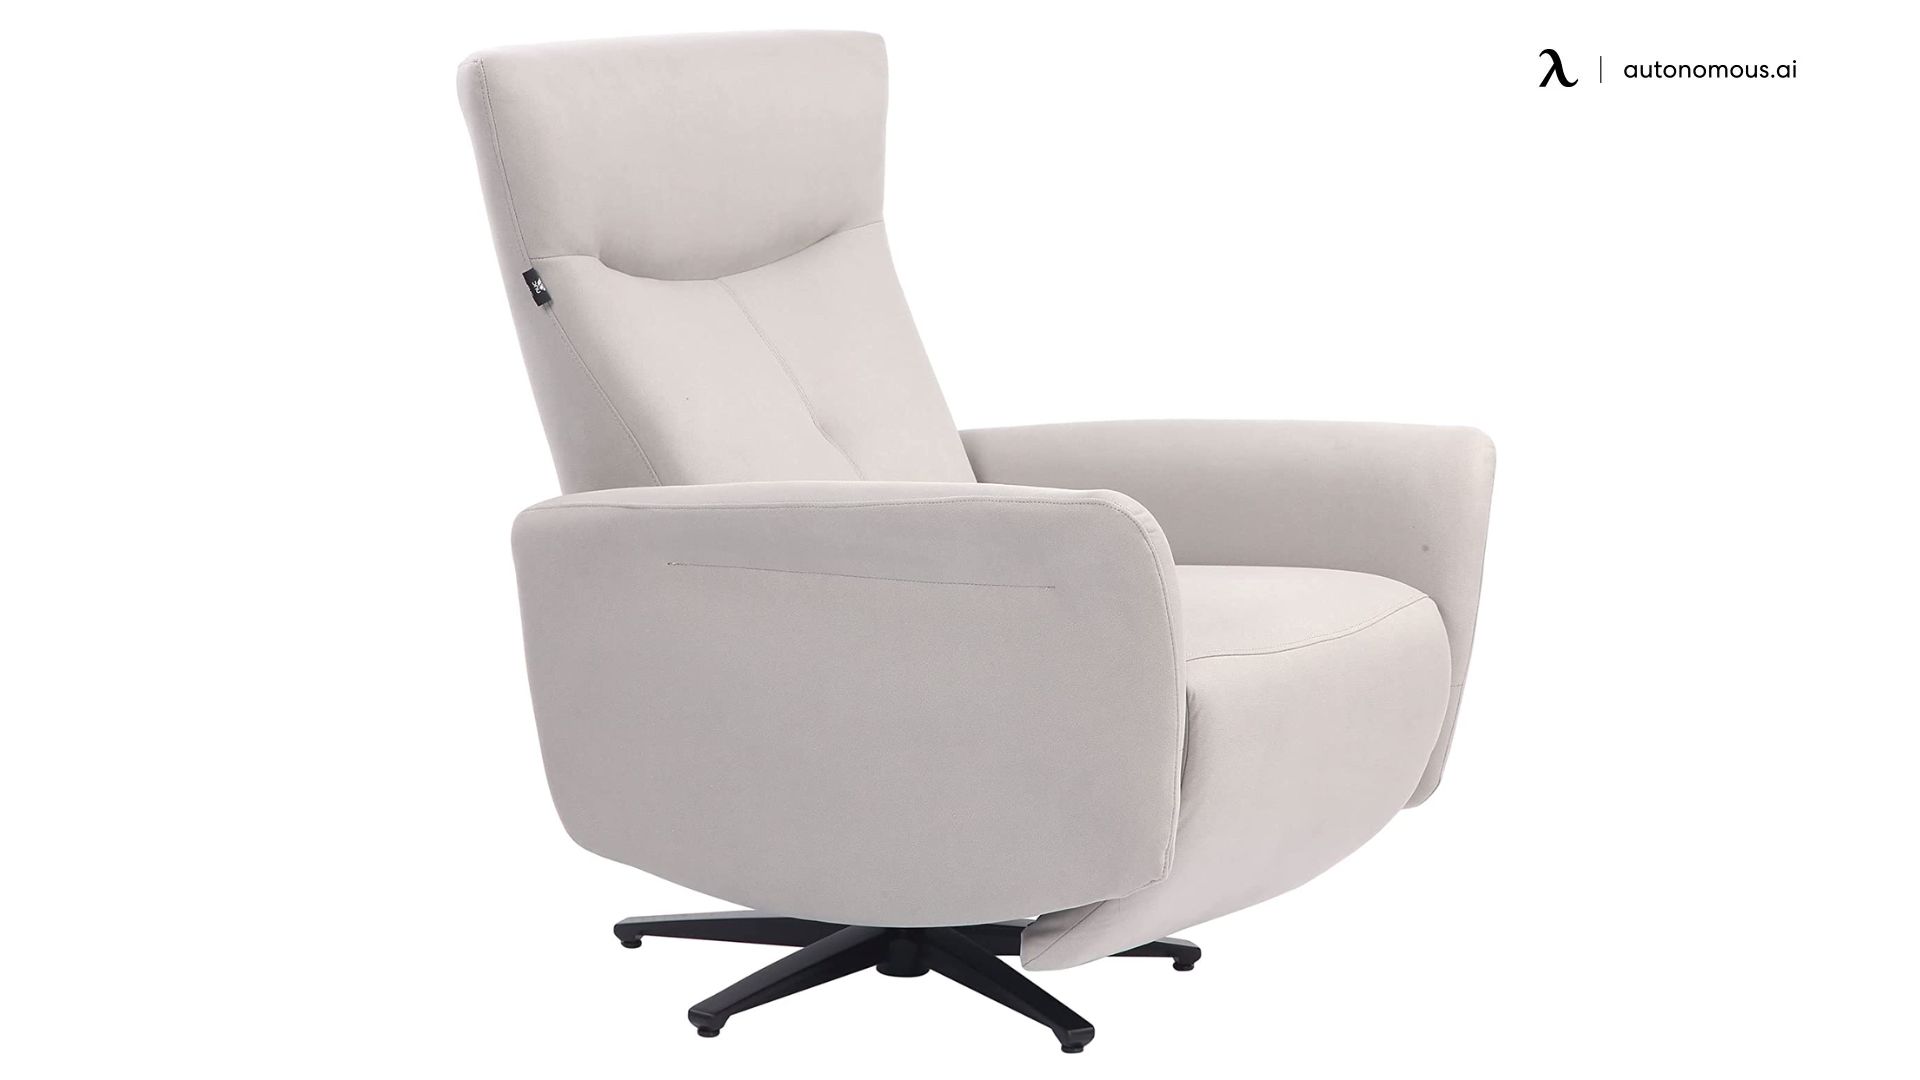 HOMOPIV TV Chair with Reclining Function